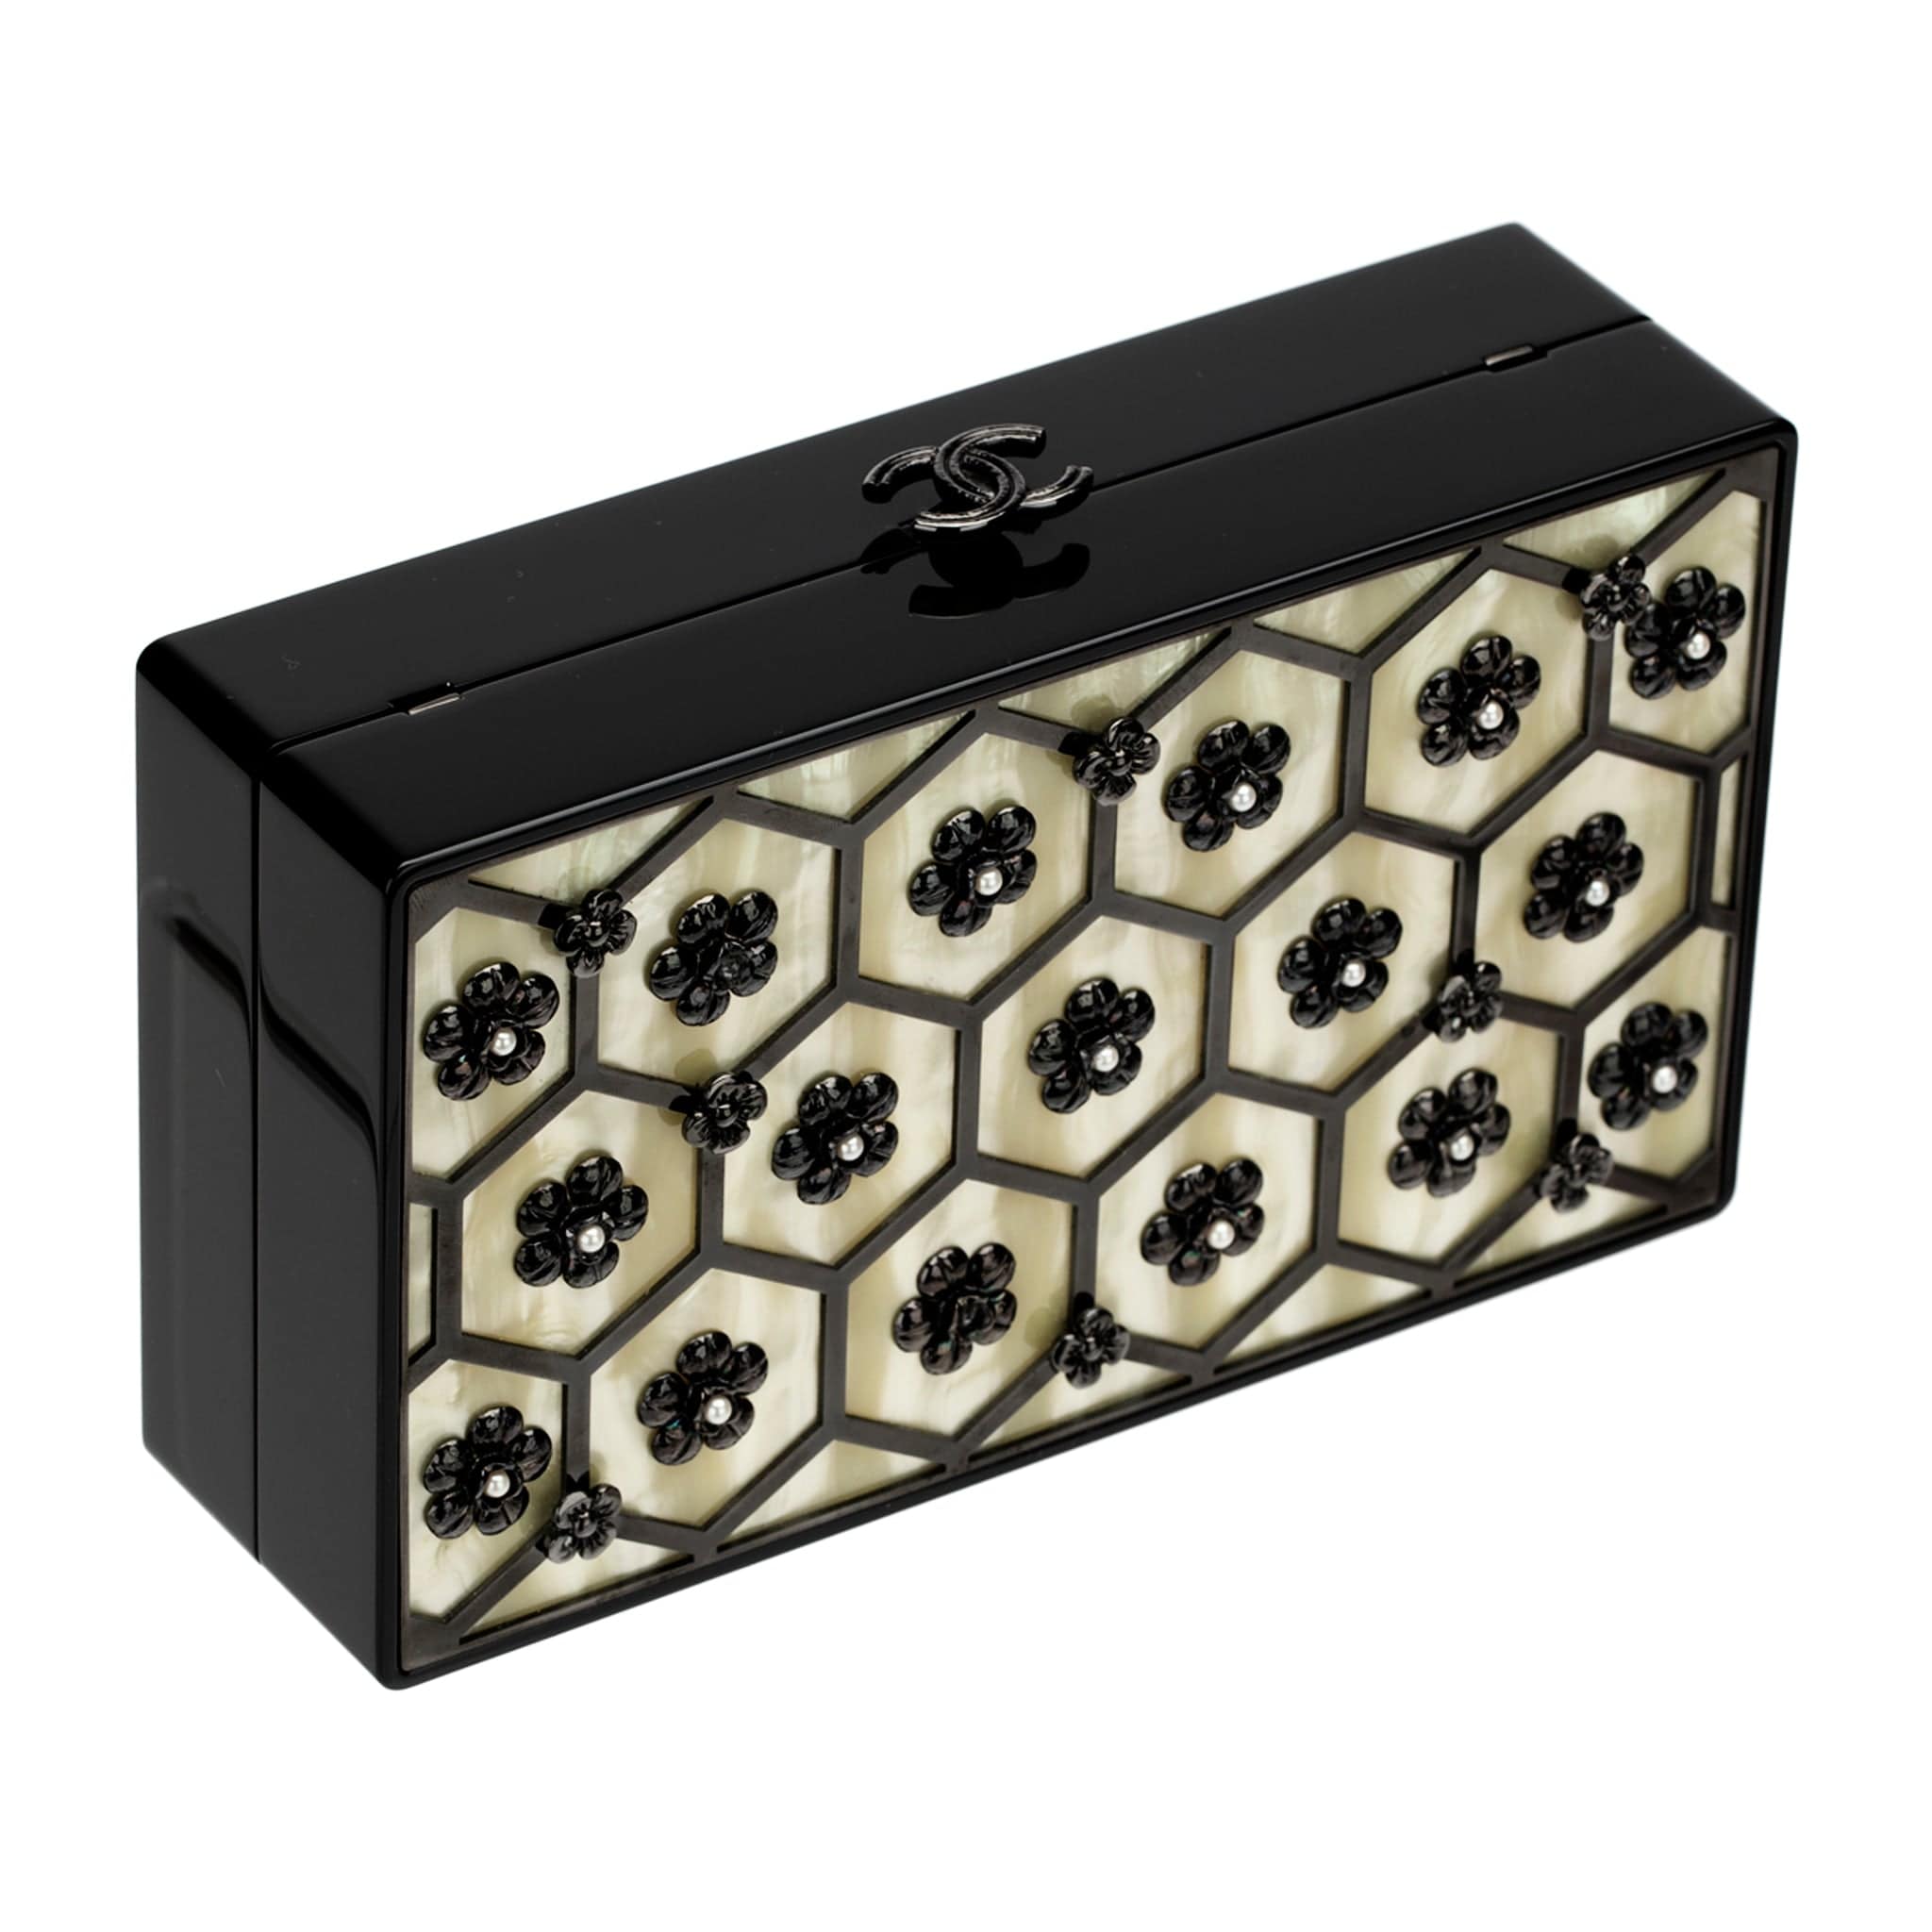 CHANEL MINAUDIÈRE LIMITED EDITION MOTHER-OF-PEARL BLACK HARDWARW - On Repeat